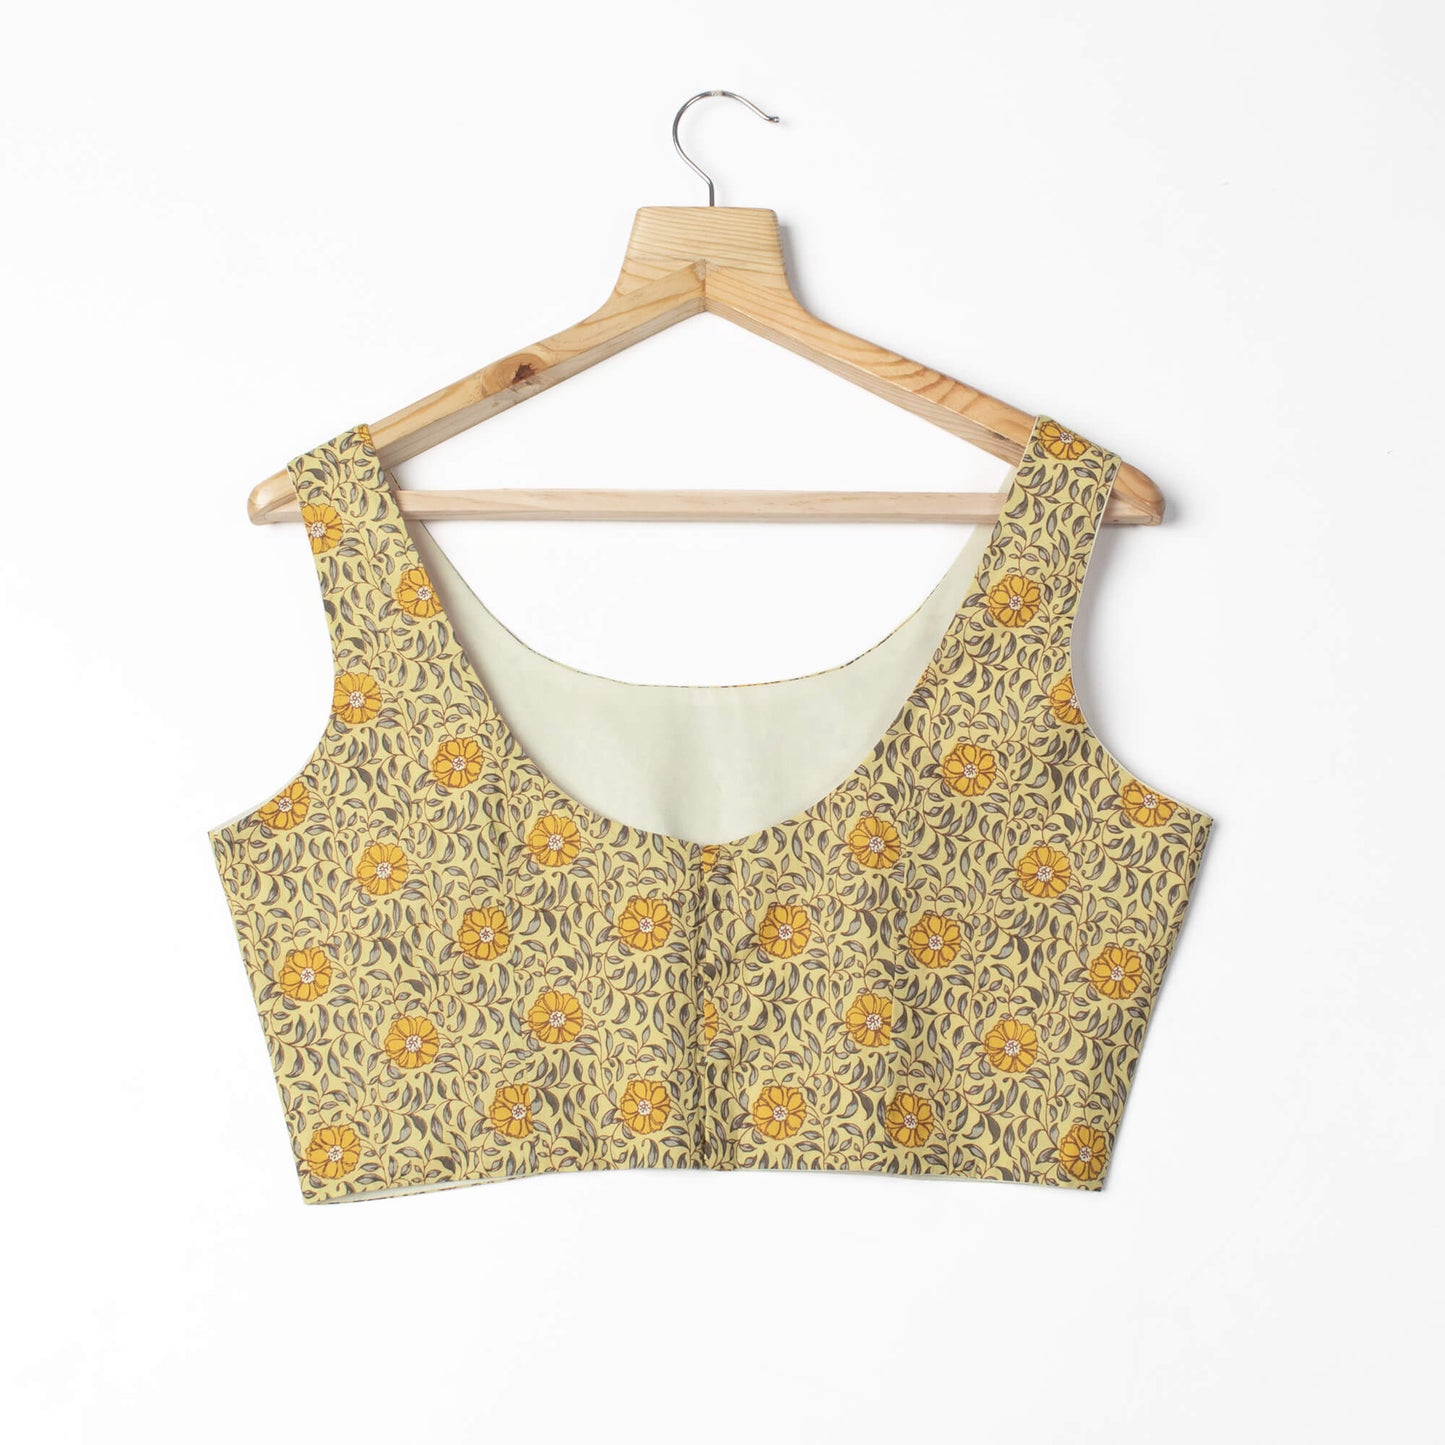 Floral Printed Cambric Blouse